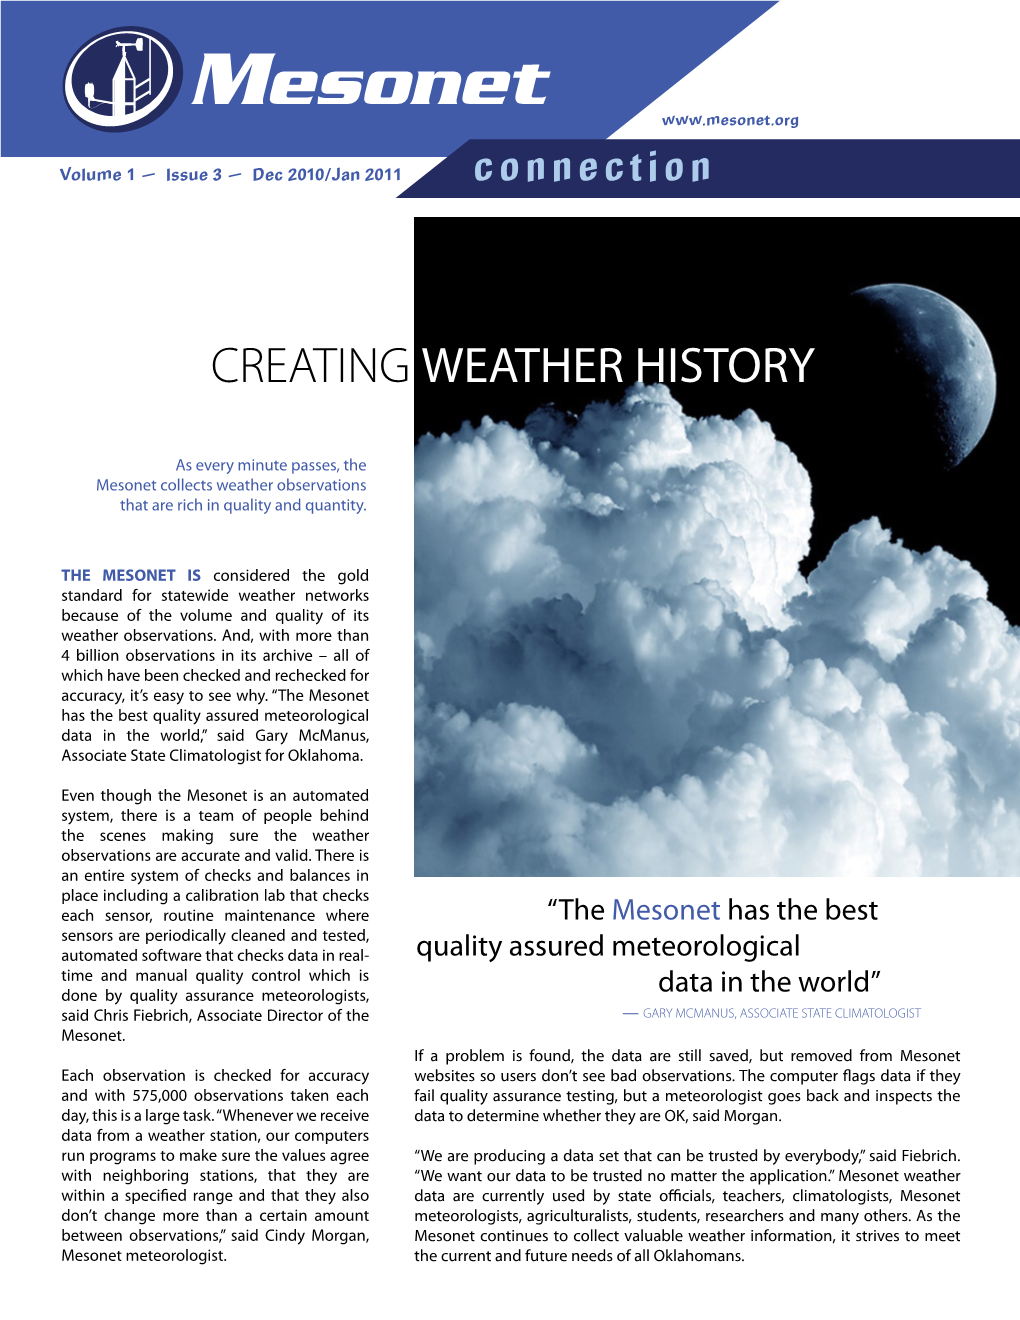 Creating Weather History